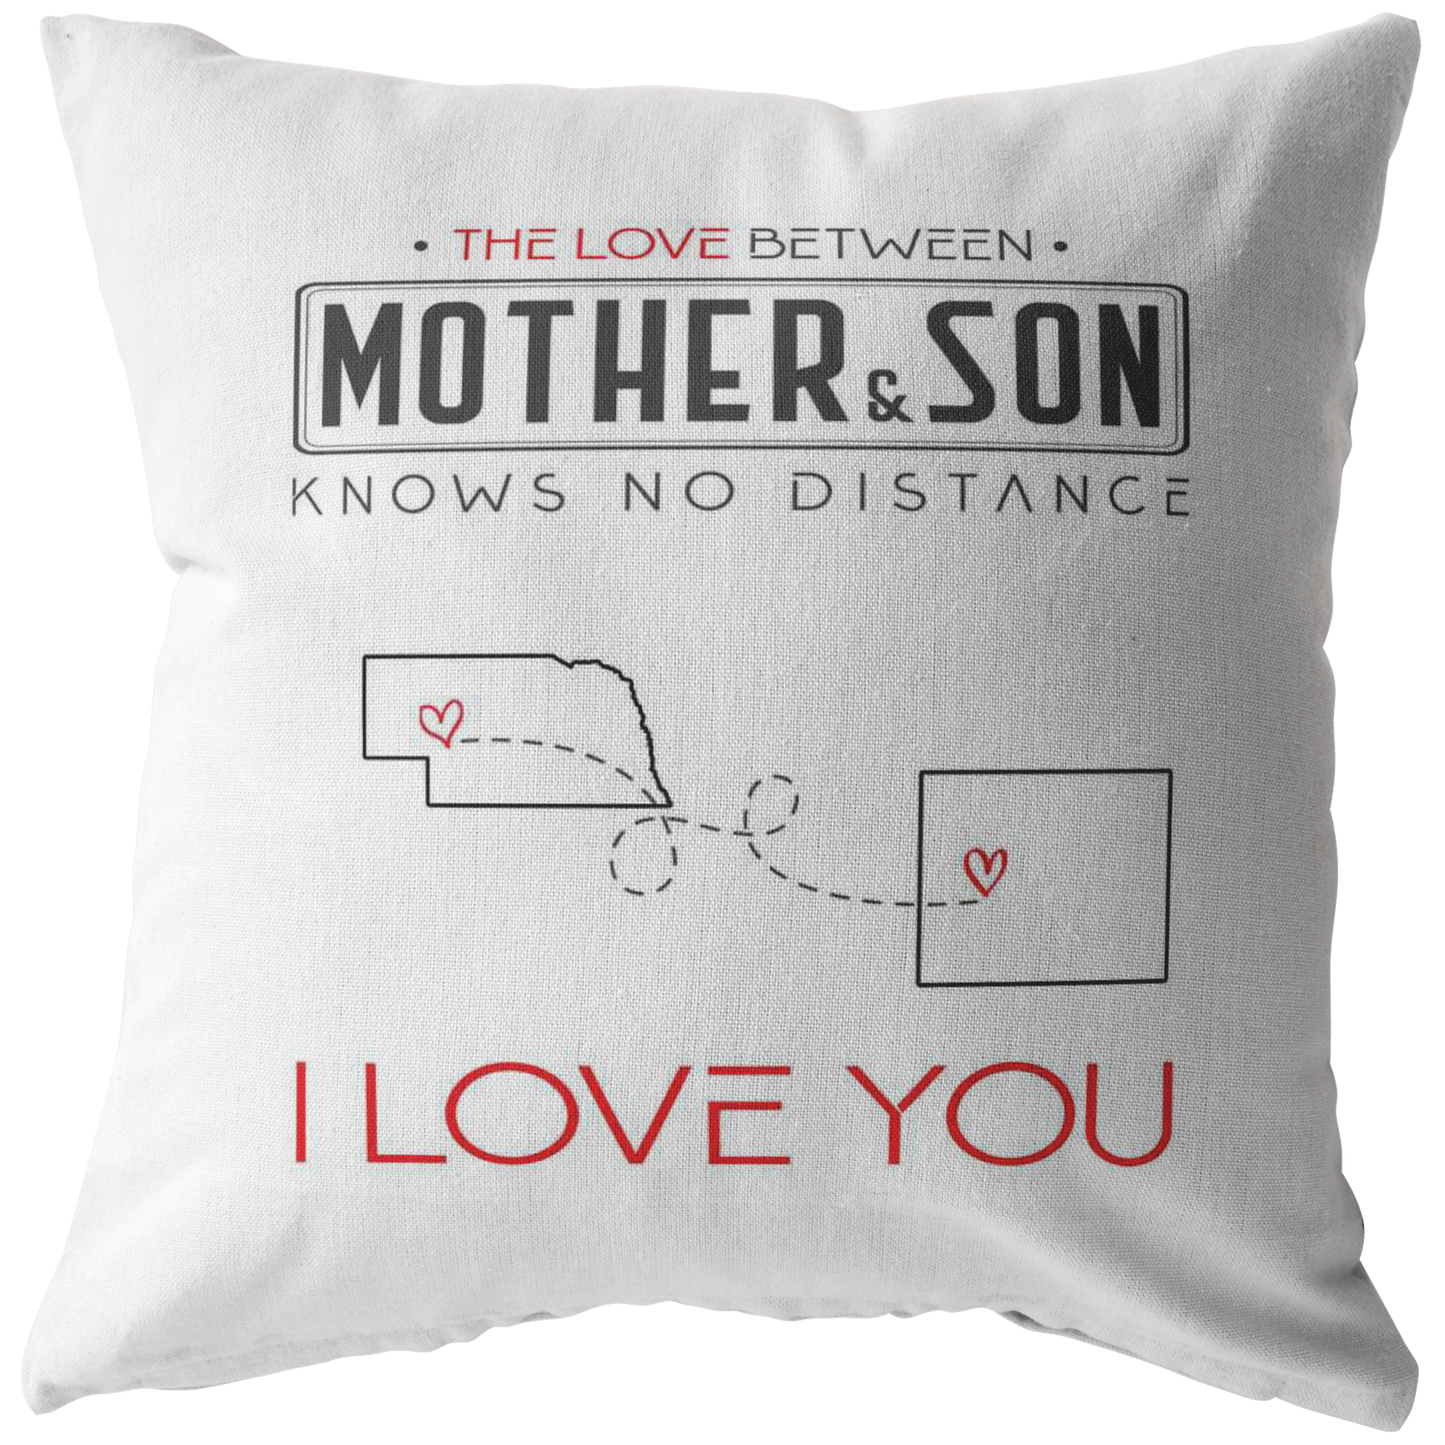 ND-pl20420441-sp-19685 - Mothers Day Gifts From Son - The Love Between Mother  Son